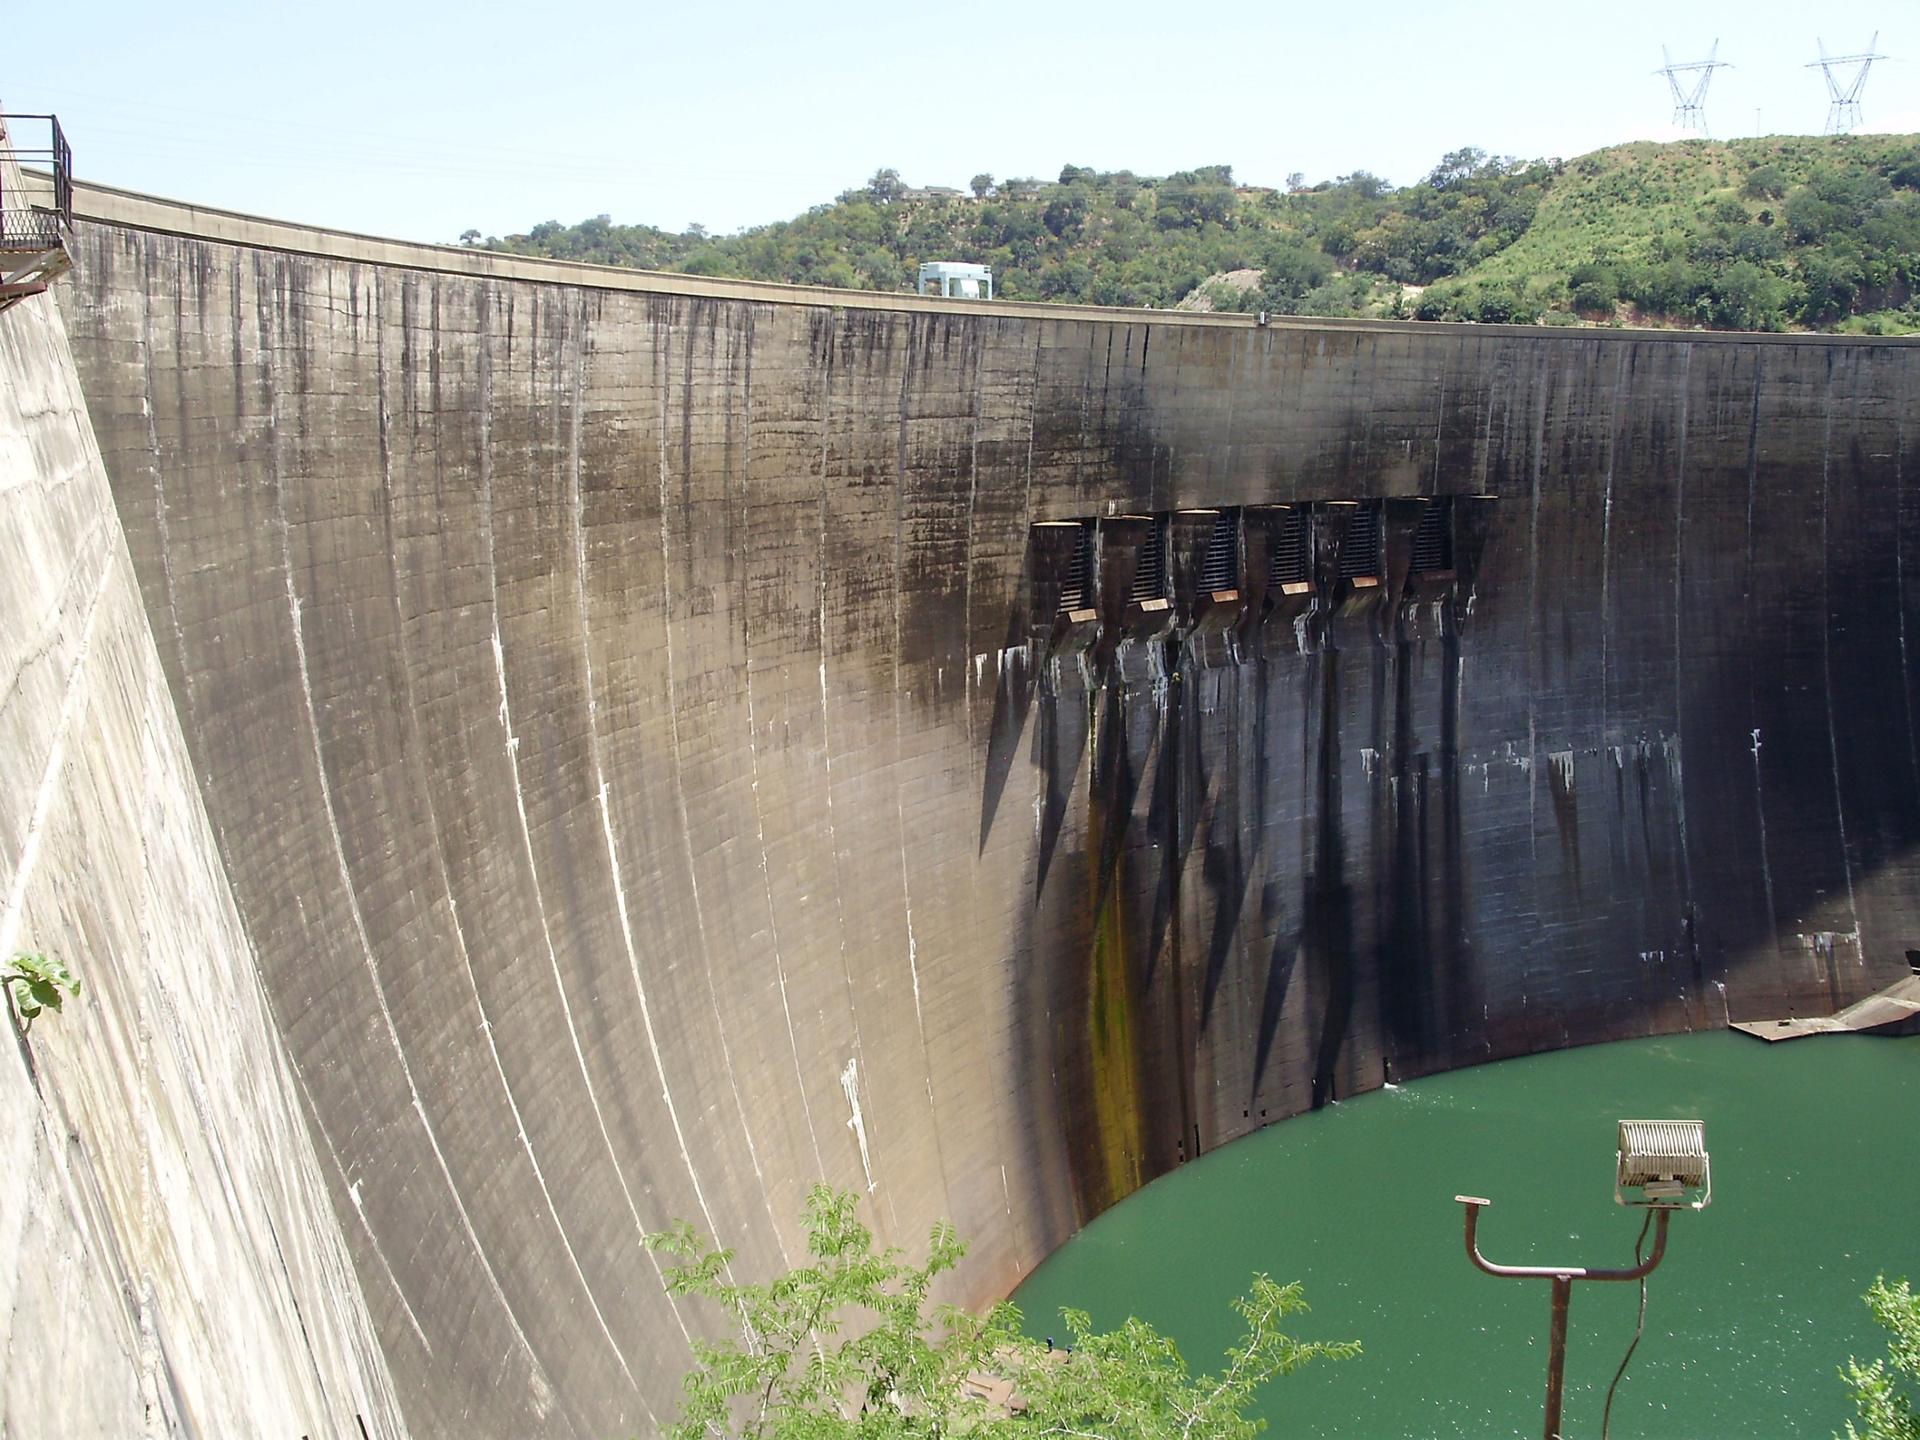 Below the Kariba dam wall, with Zambia border in the background. 